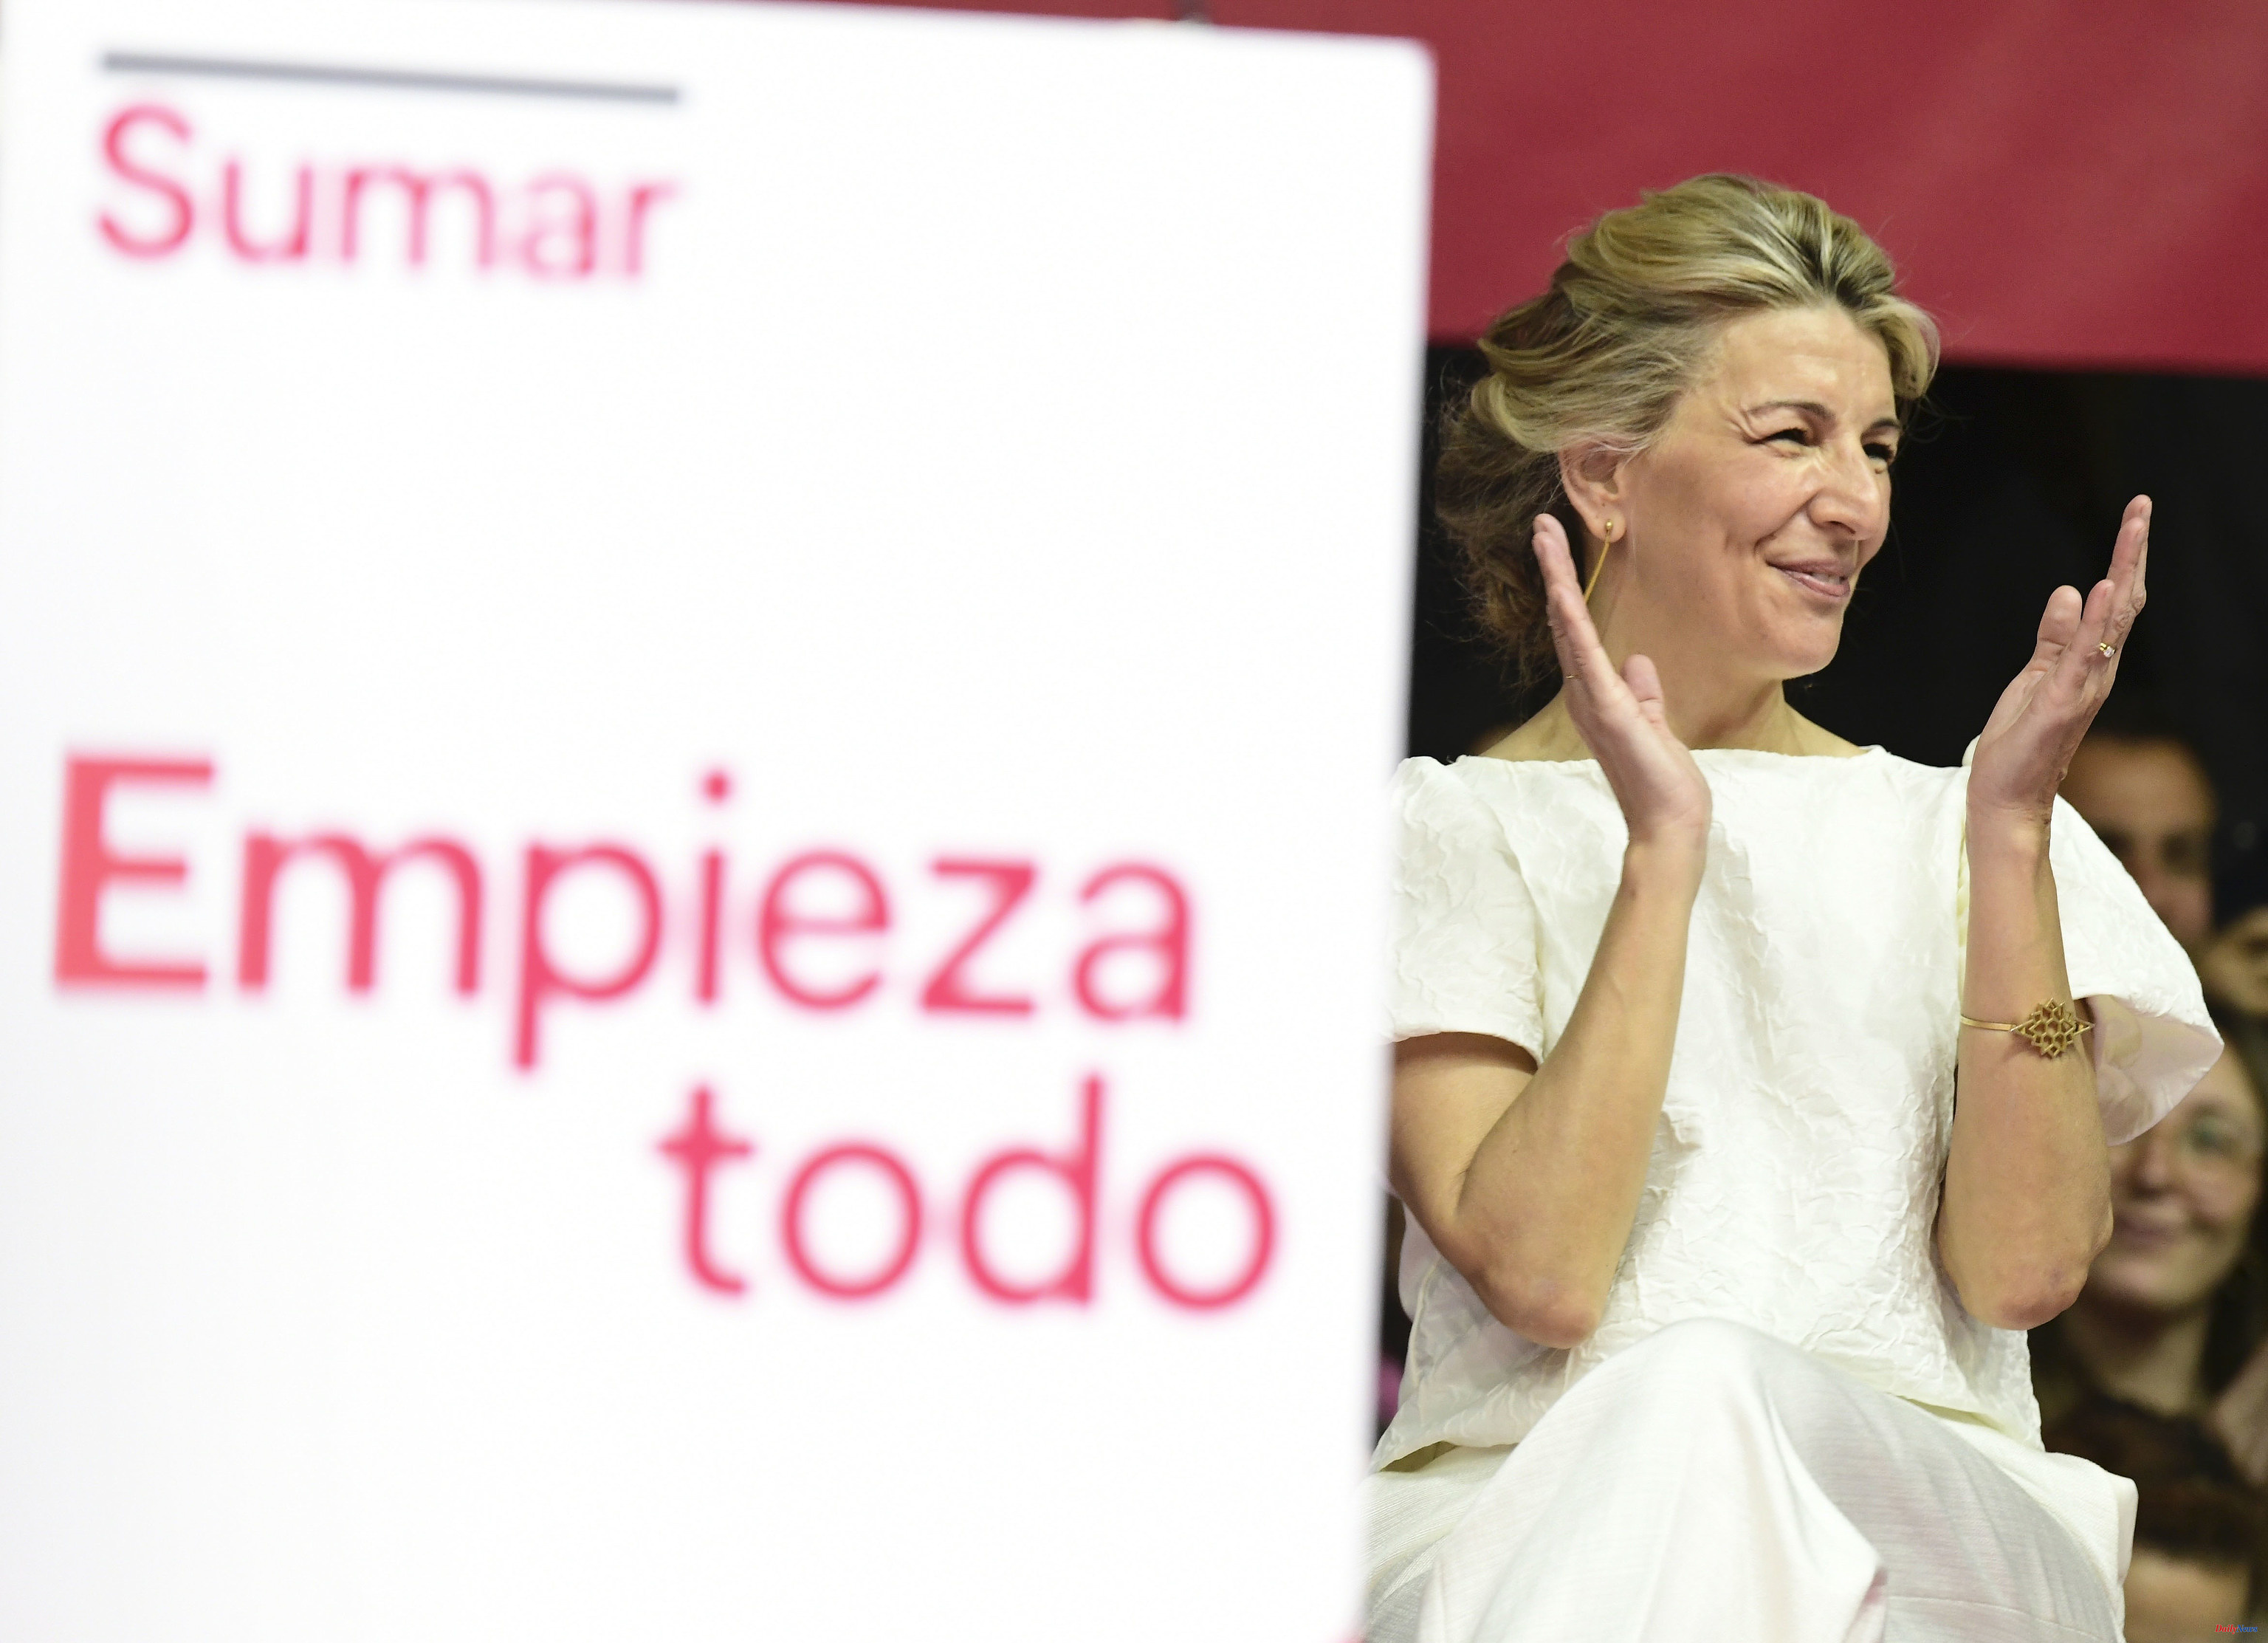 Politics Yolanda Díaz takes over from Podemos by rejecting "guardianship": "I belong to no one... I want to be the first female president of Spain"